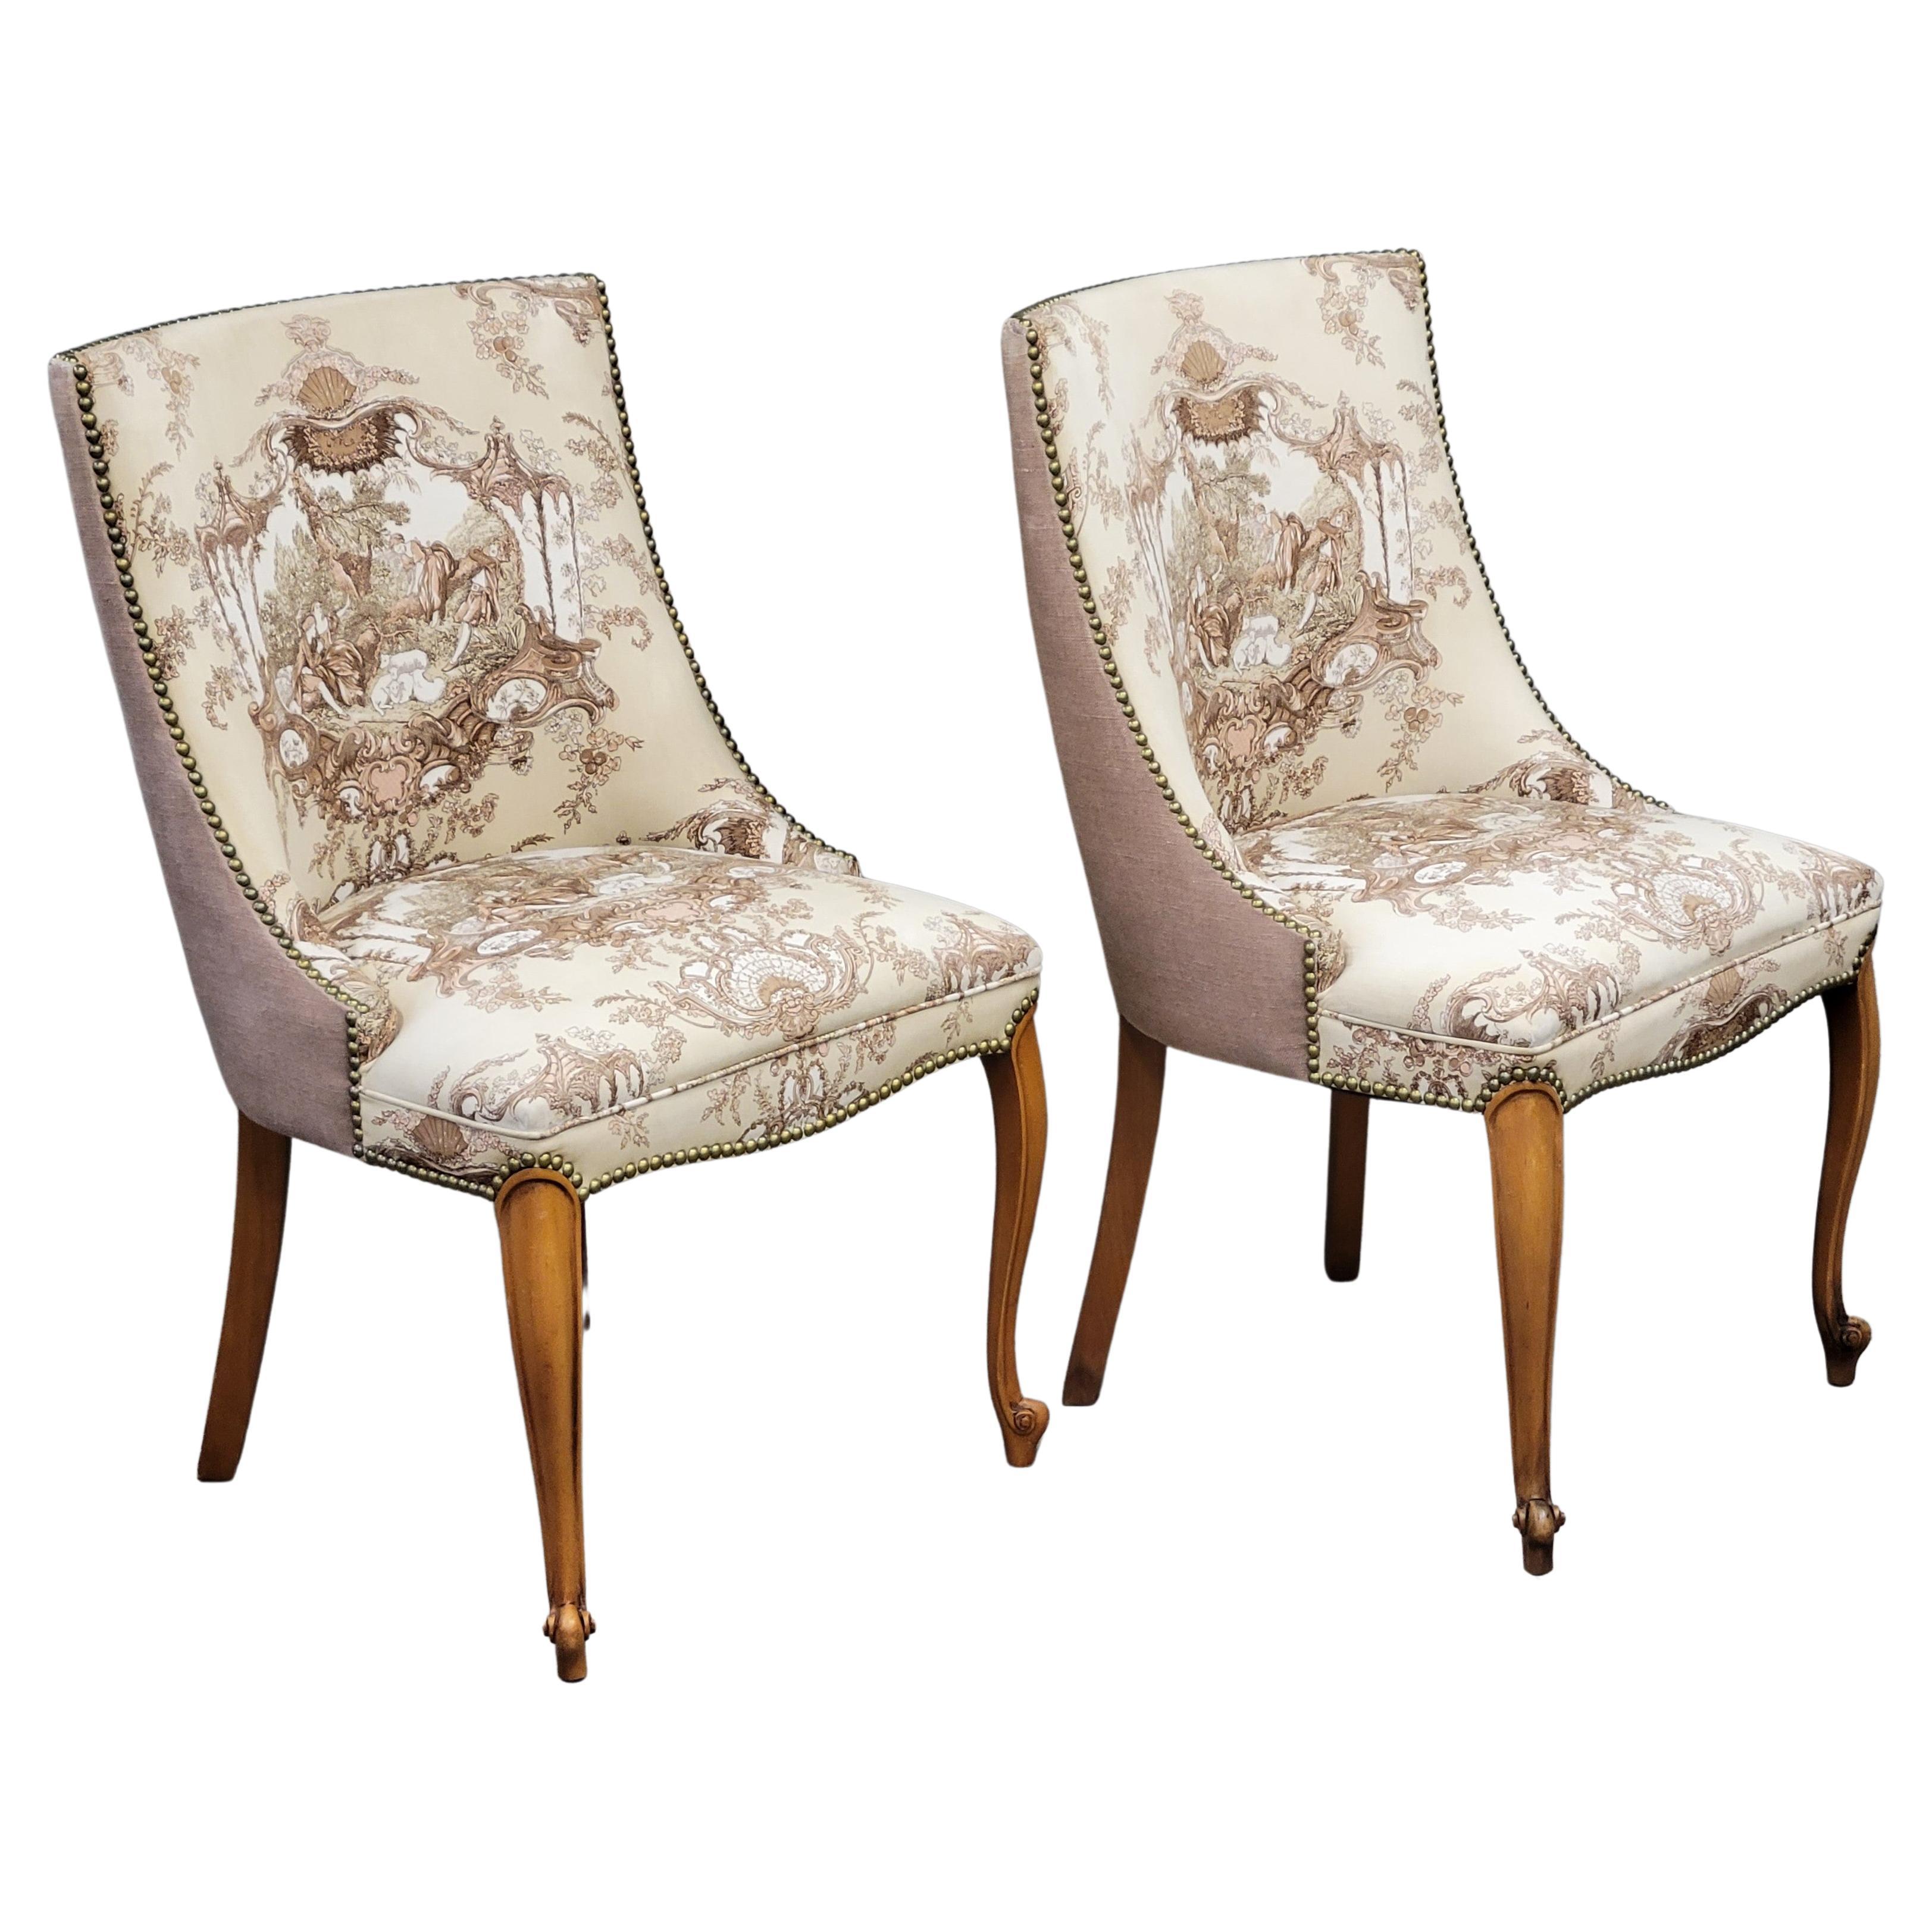 Vintage French Slipper Chairs with Toile Upholstery, a Pair